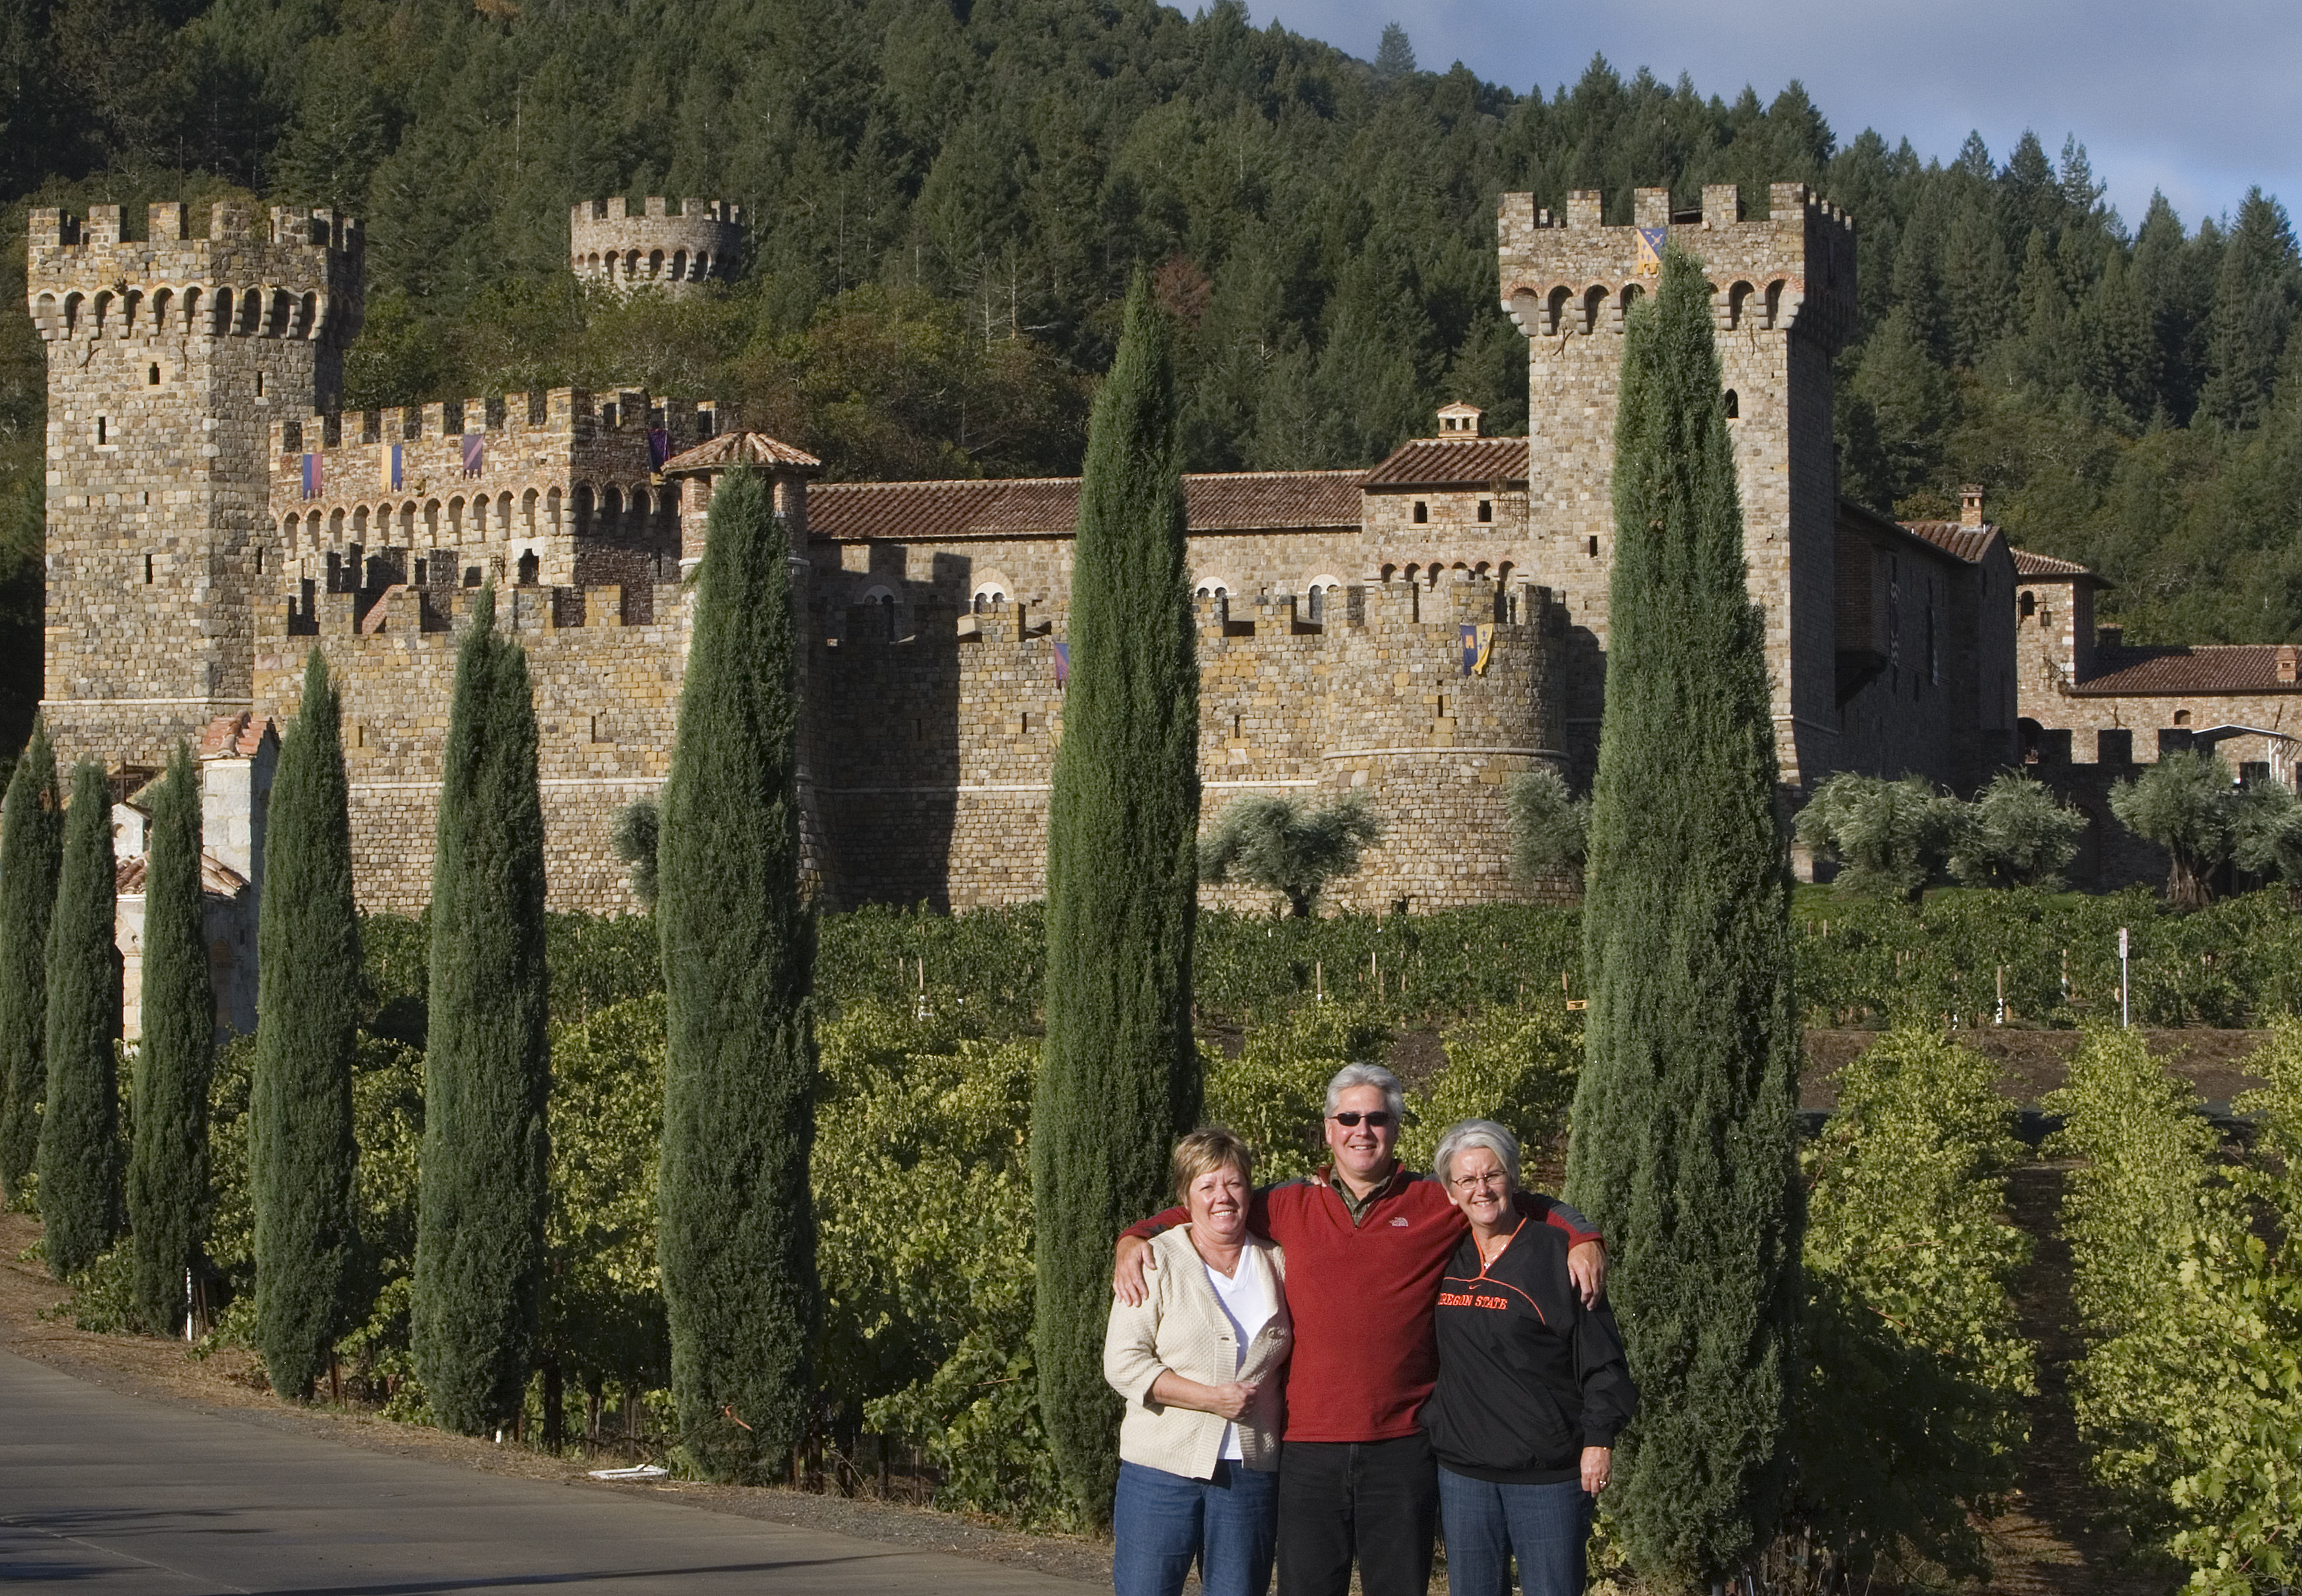 Shelia, Steve and Mary at the castle